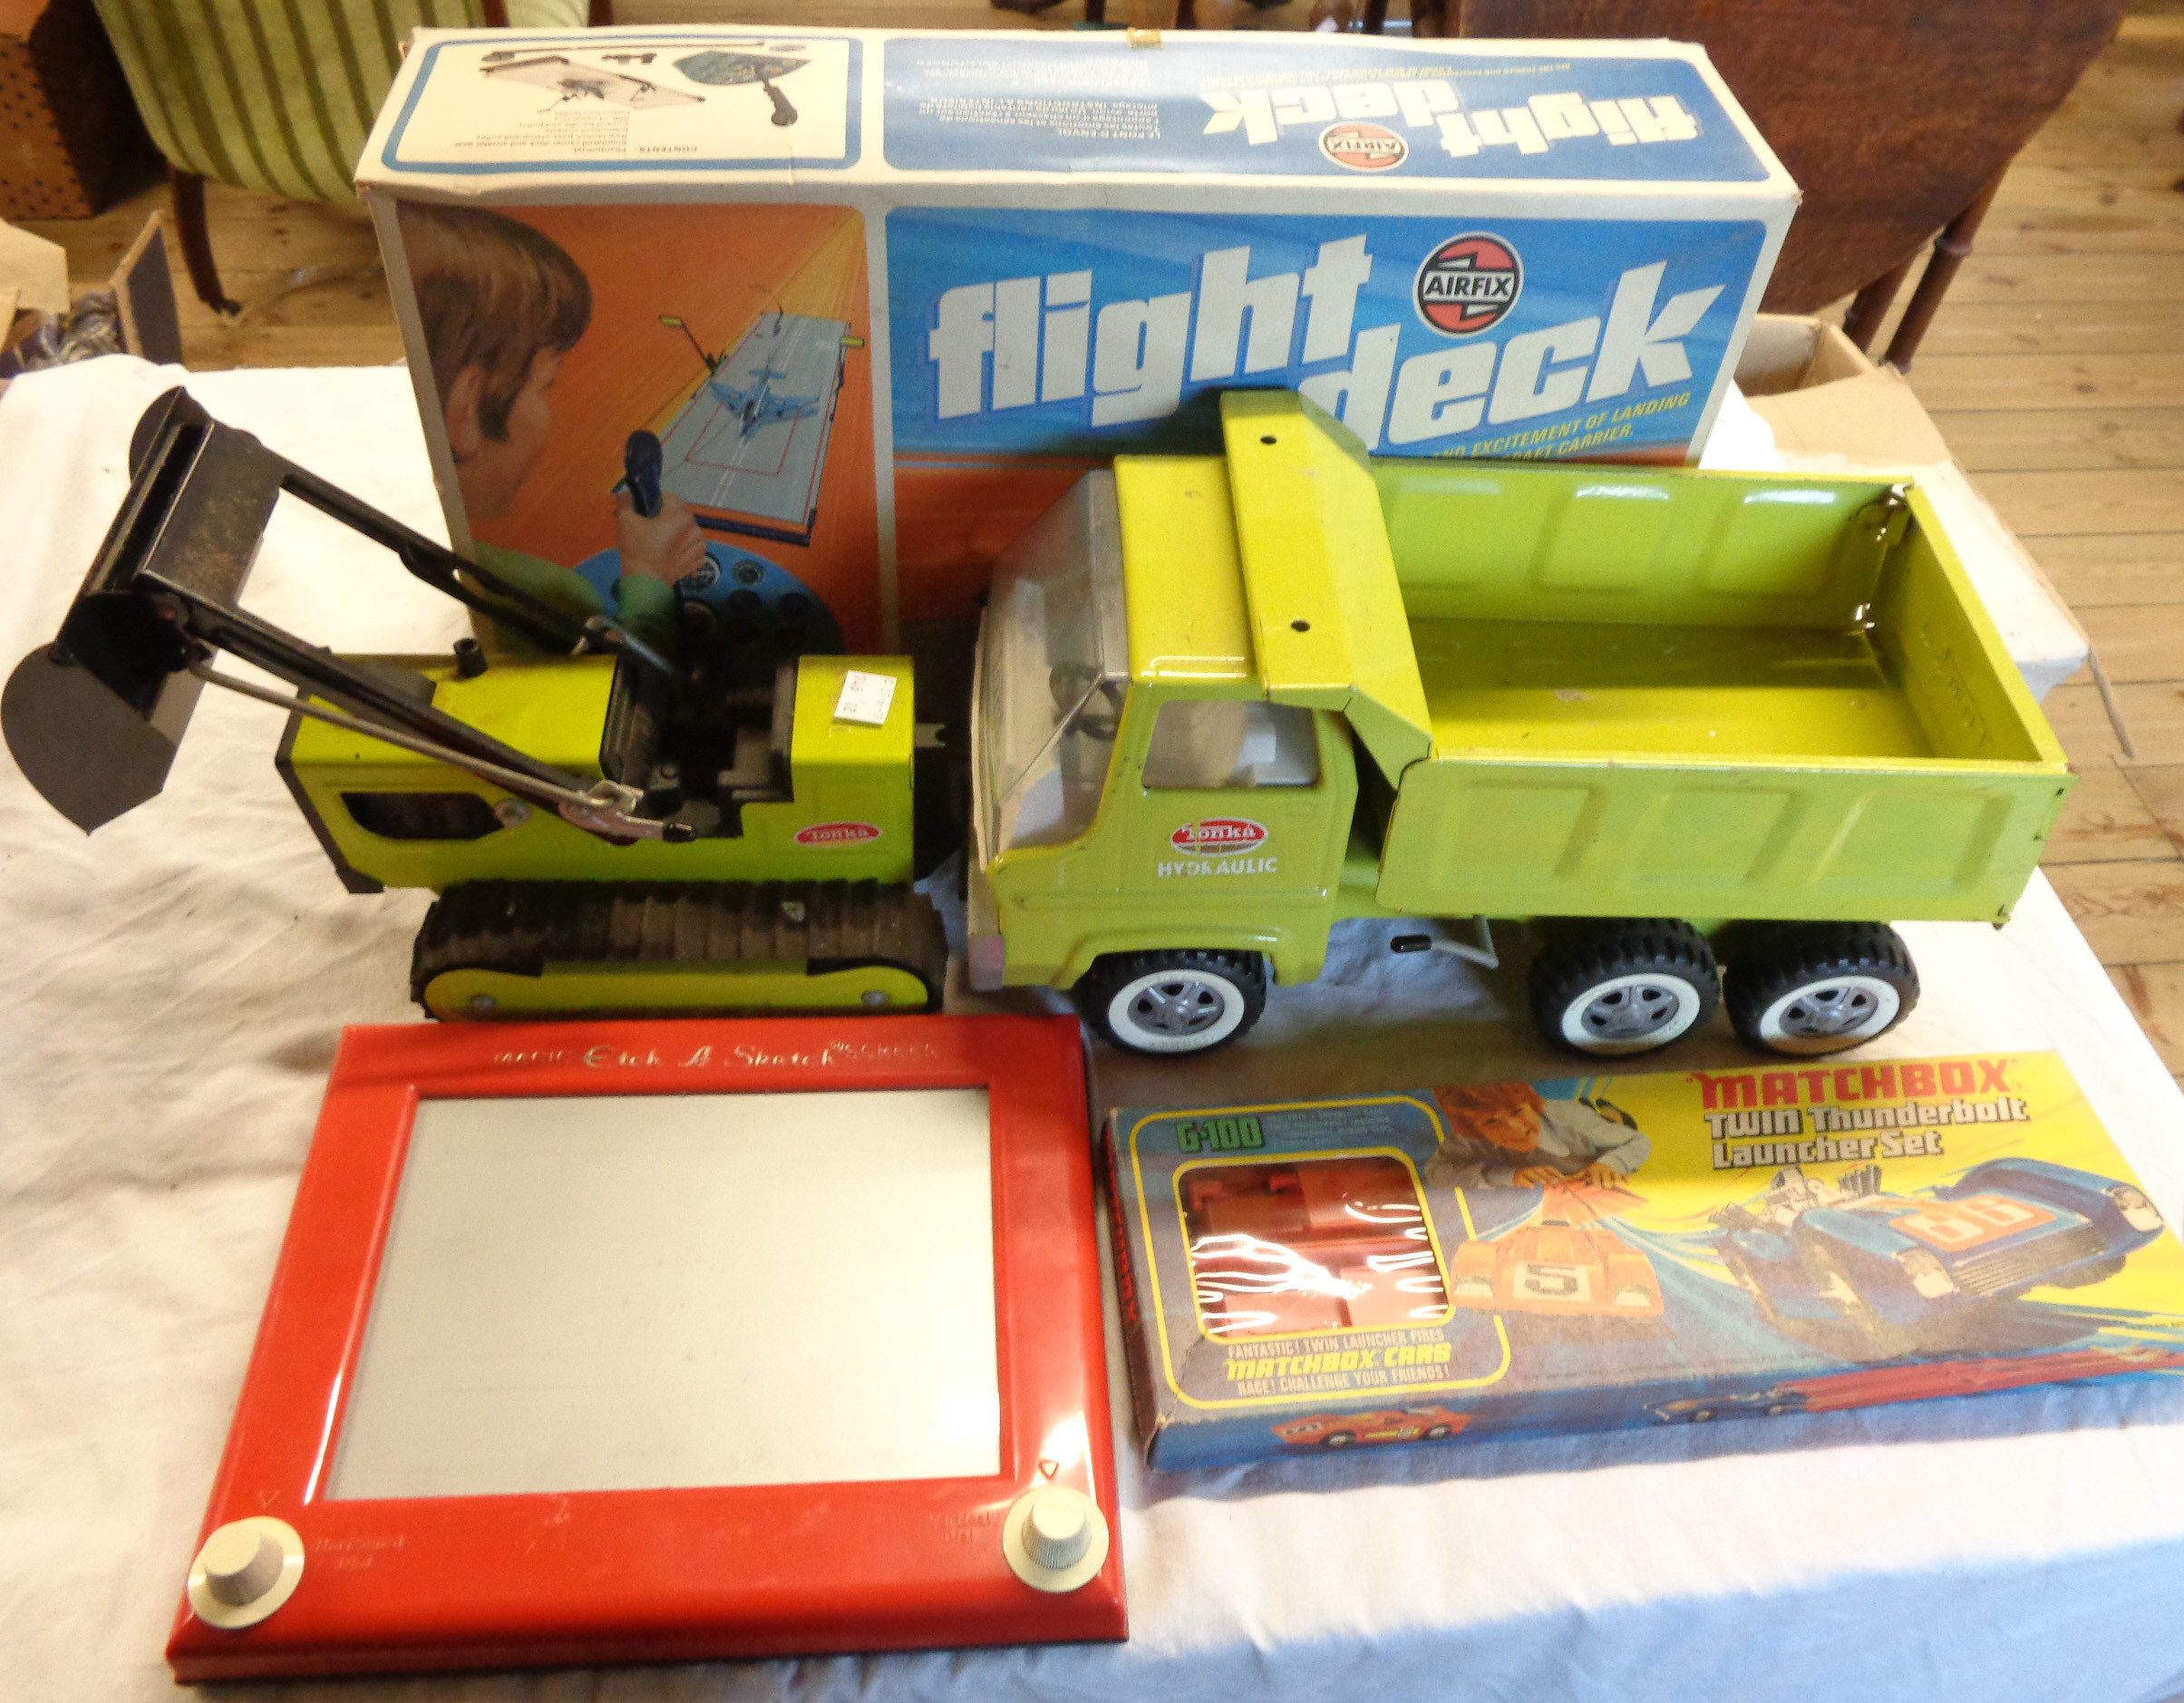 A collection of toys and games including Airfix Flight Deck, Matchbox Twin Thunderbolt Launcher,